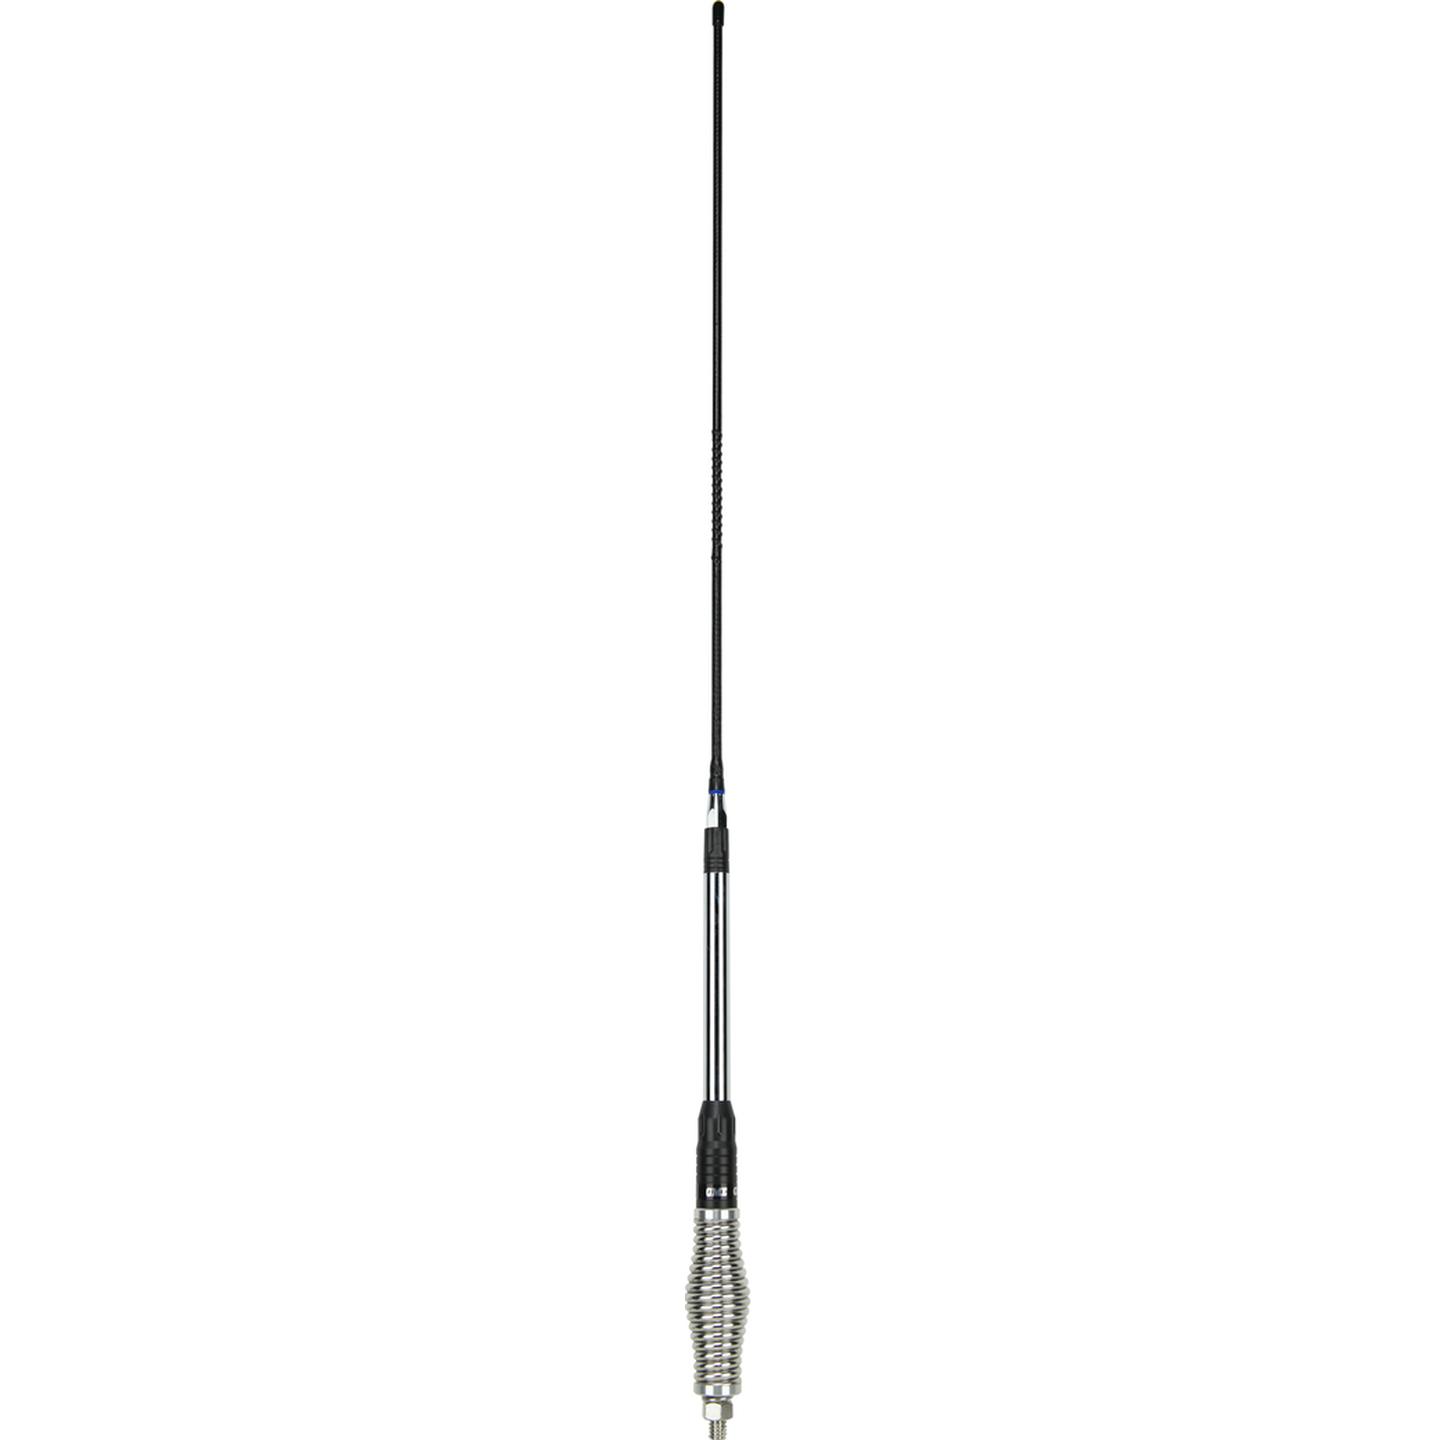 GME 640mm Elevated Feed Base AS002 Spring Fibreglass Colinear Antenna 6.6dBi Gain - Black